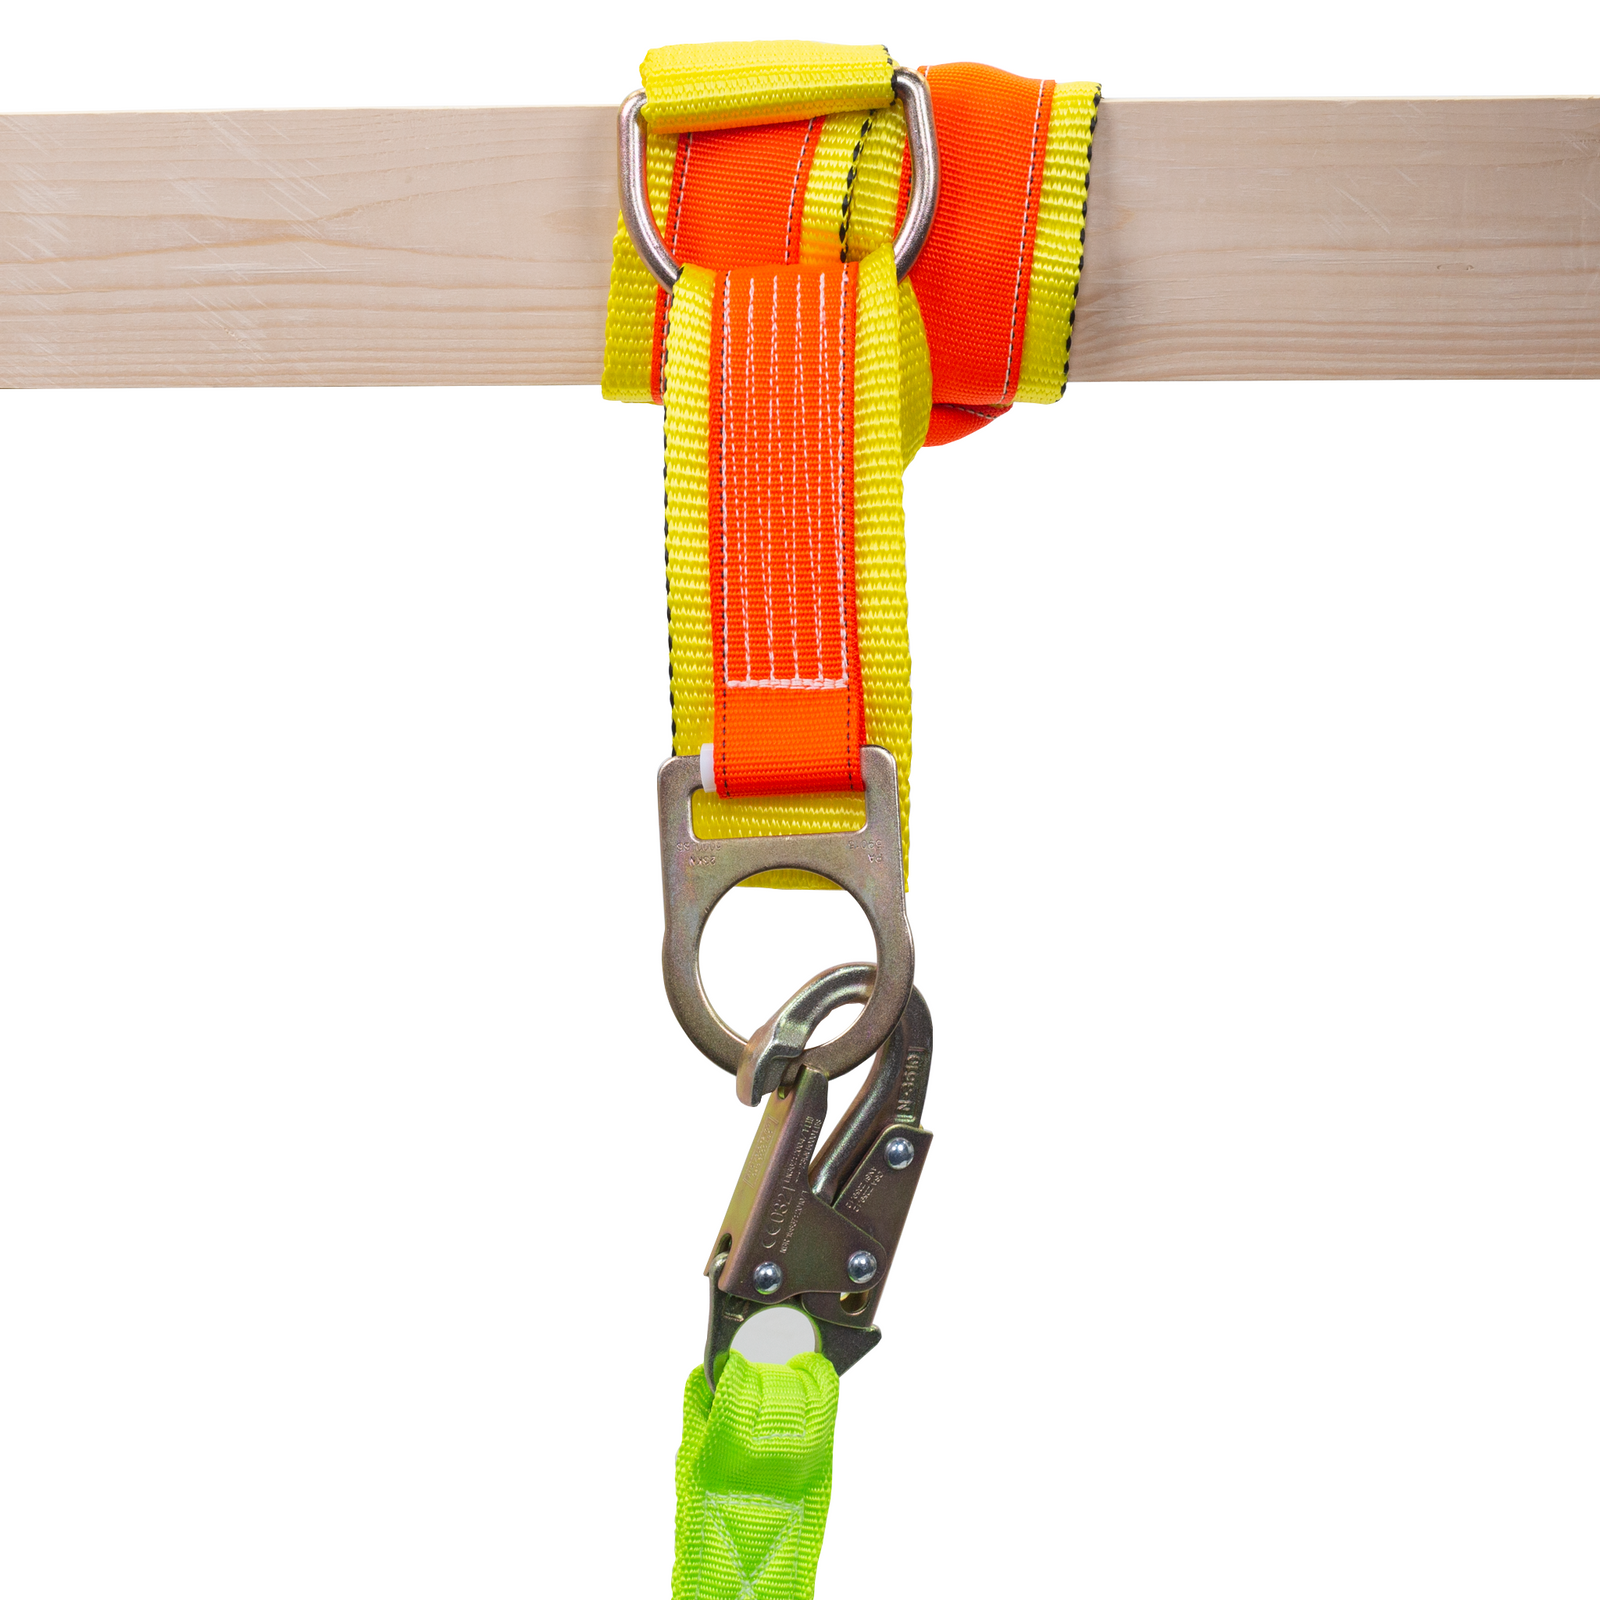 A cross armor anchor strap with double D ring system attached to a wooden beam and a shock absorbing lanyard hooked to the metal o ring for safety